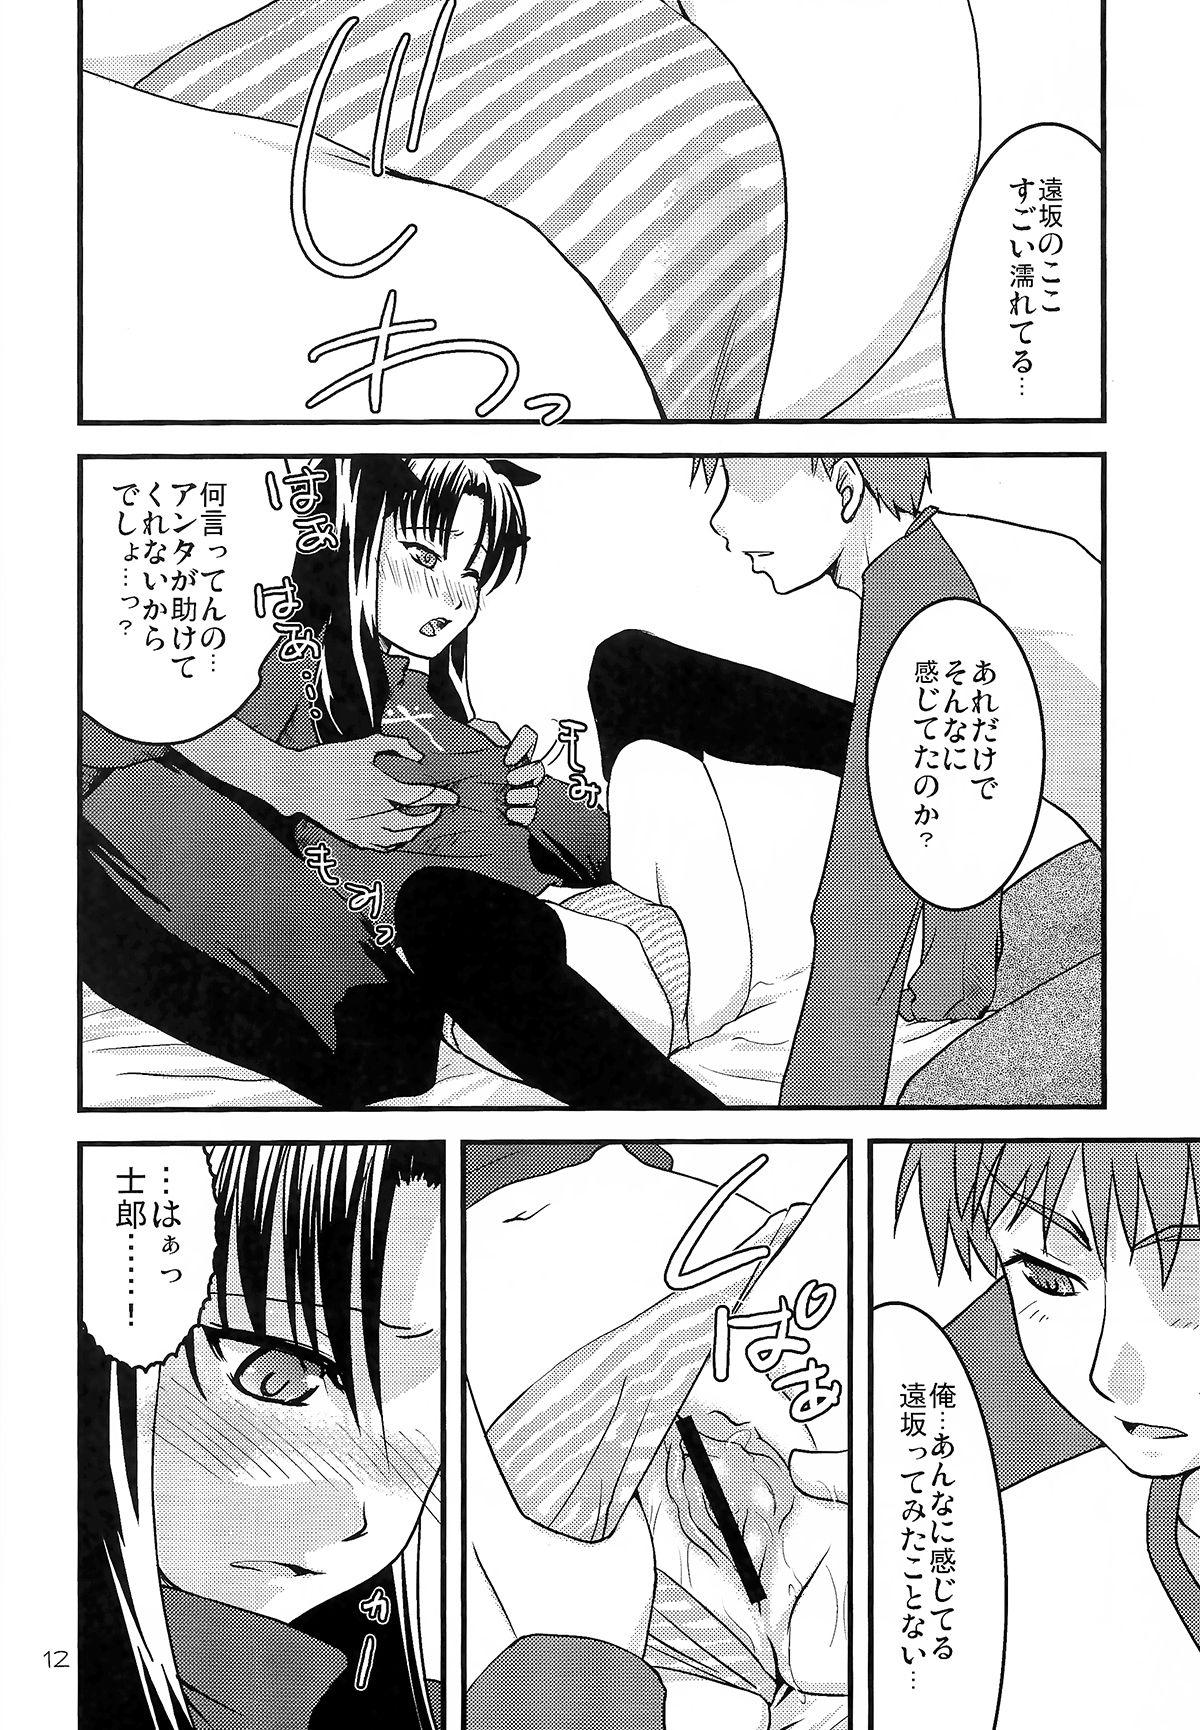 Blow Job Fakers - Fate stay night Exhib - Page 11